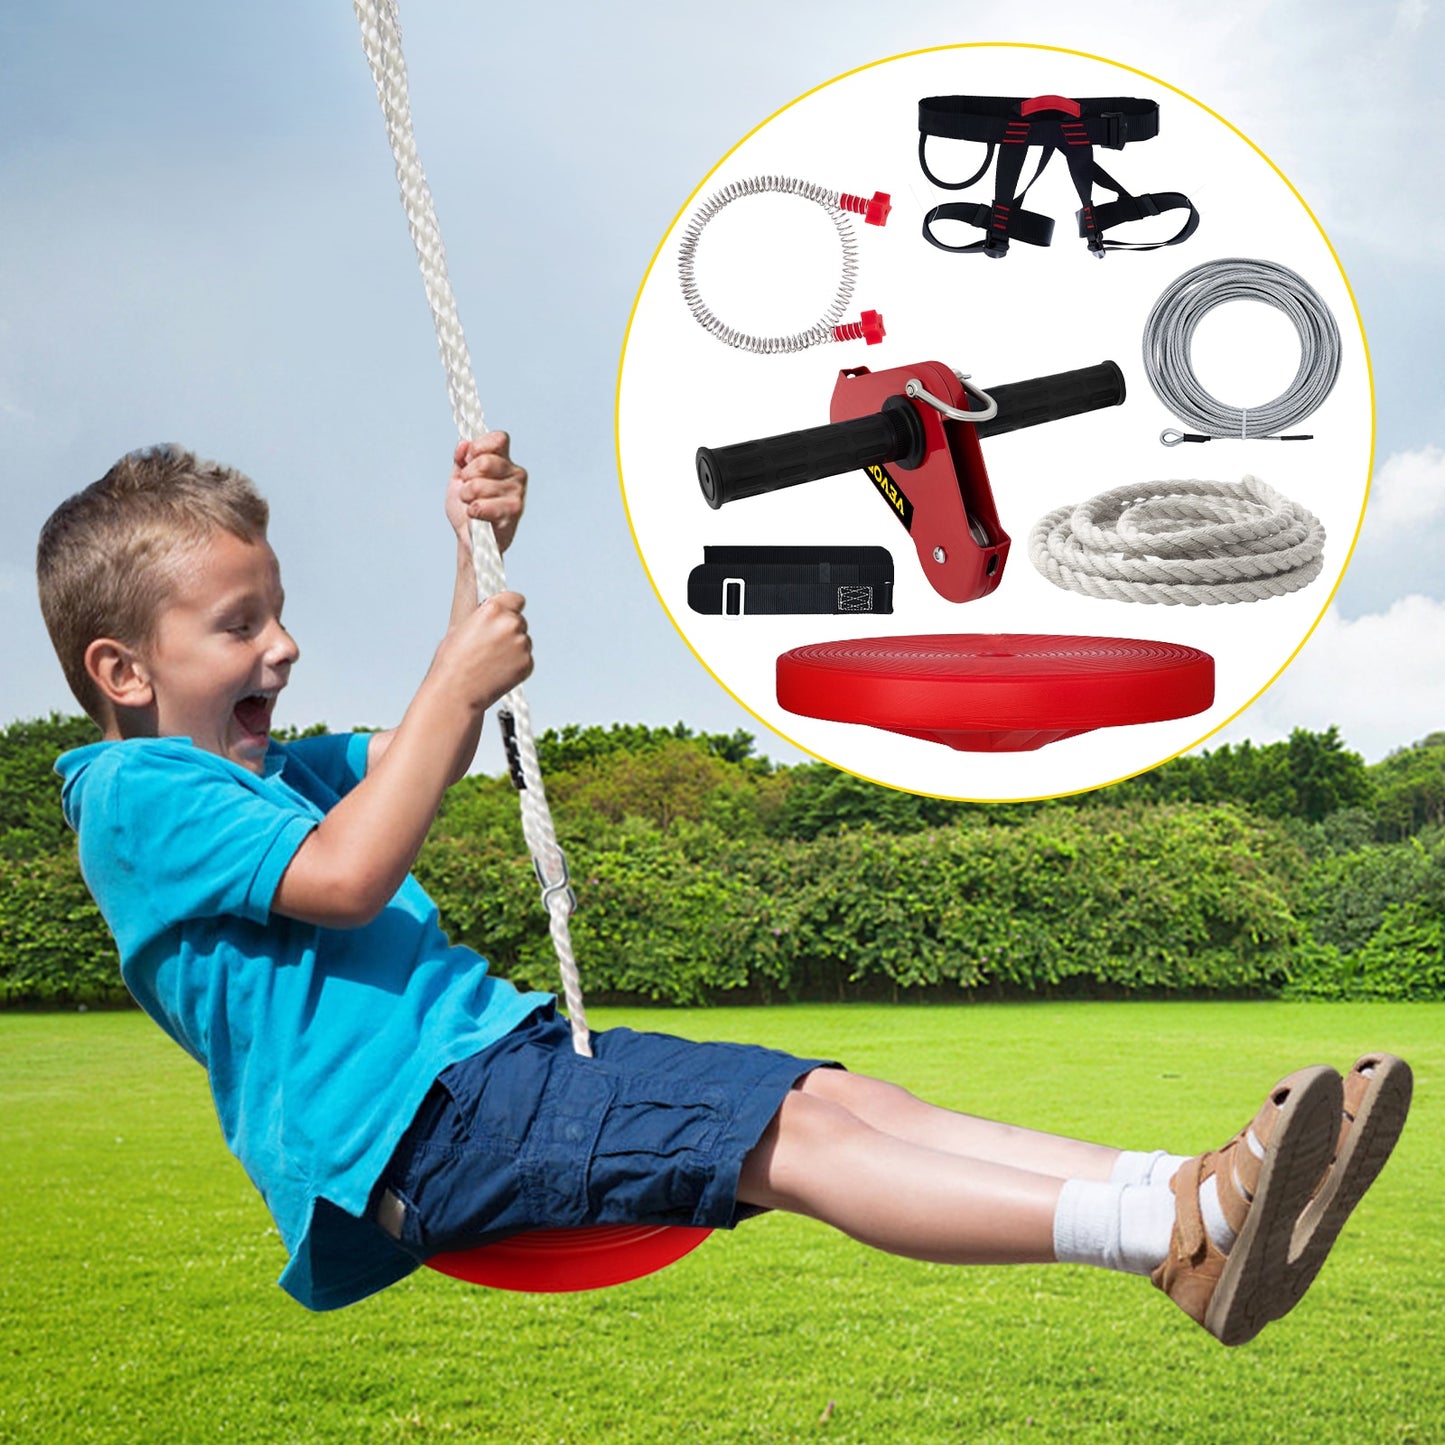 Zip line Kits for Backyard Zip Lines 90/100/110/120/150/160FT Included Swing Seat Brake and Trolley